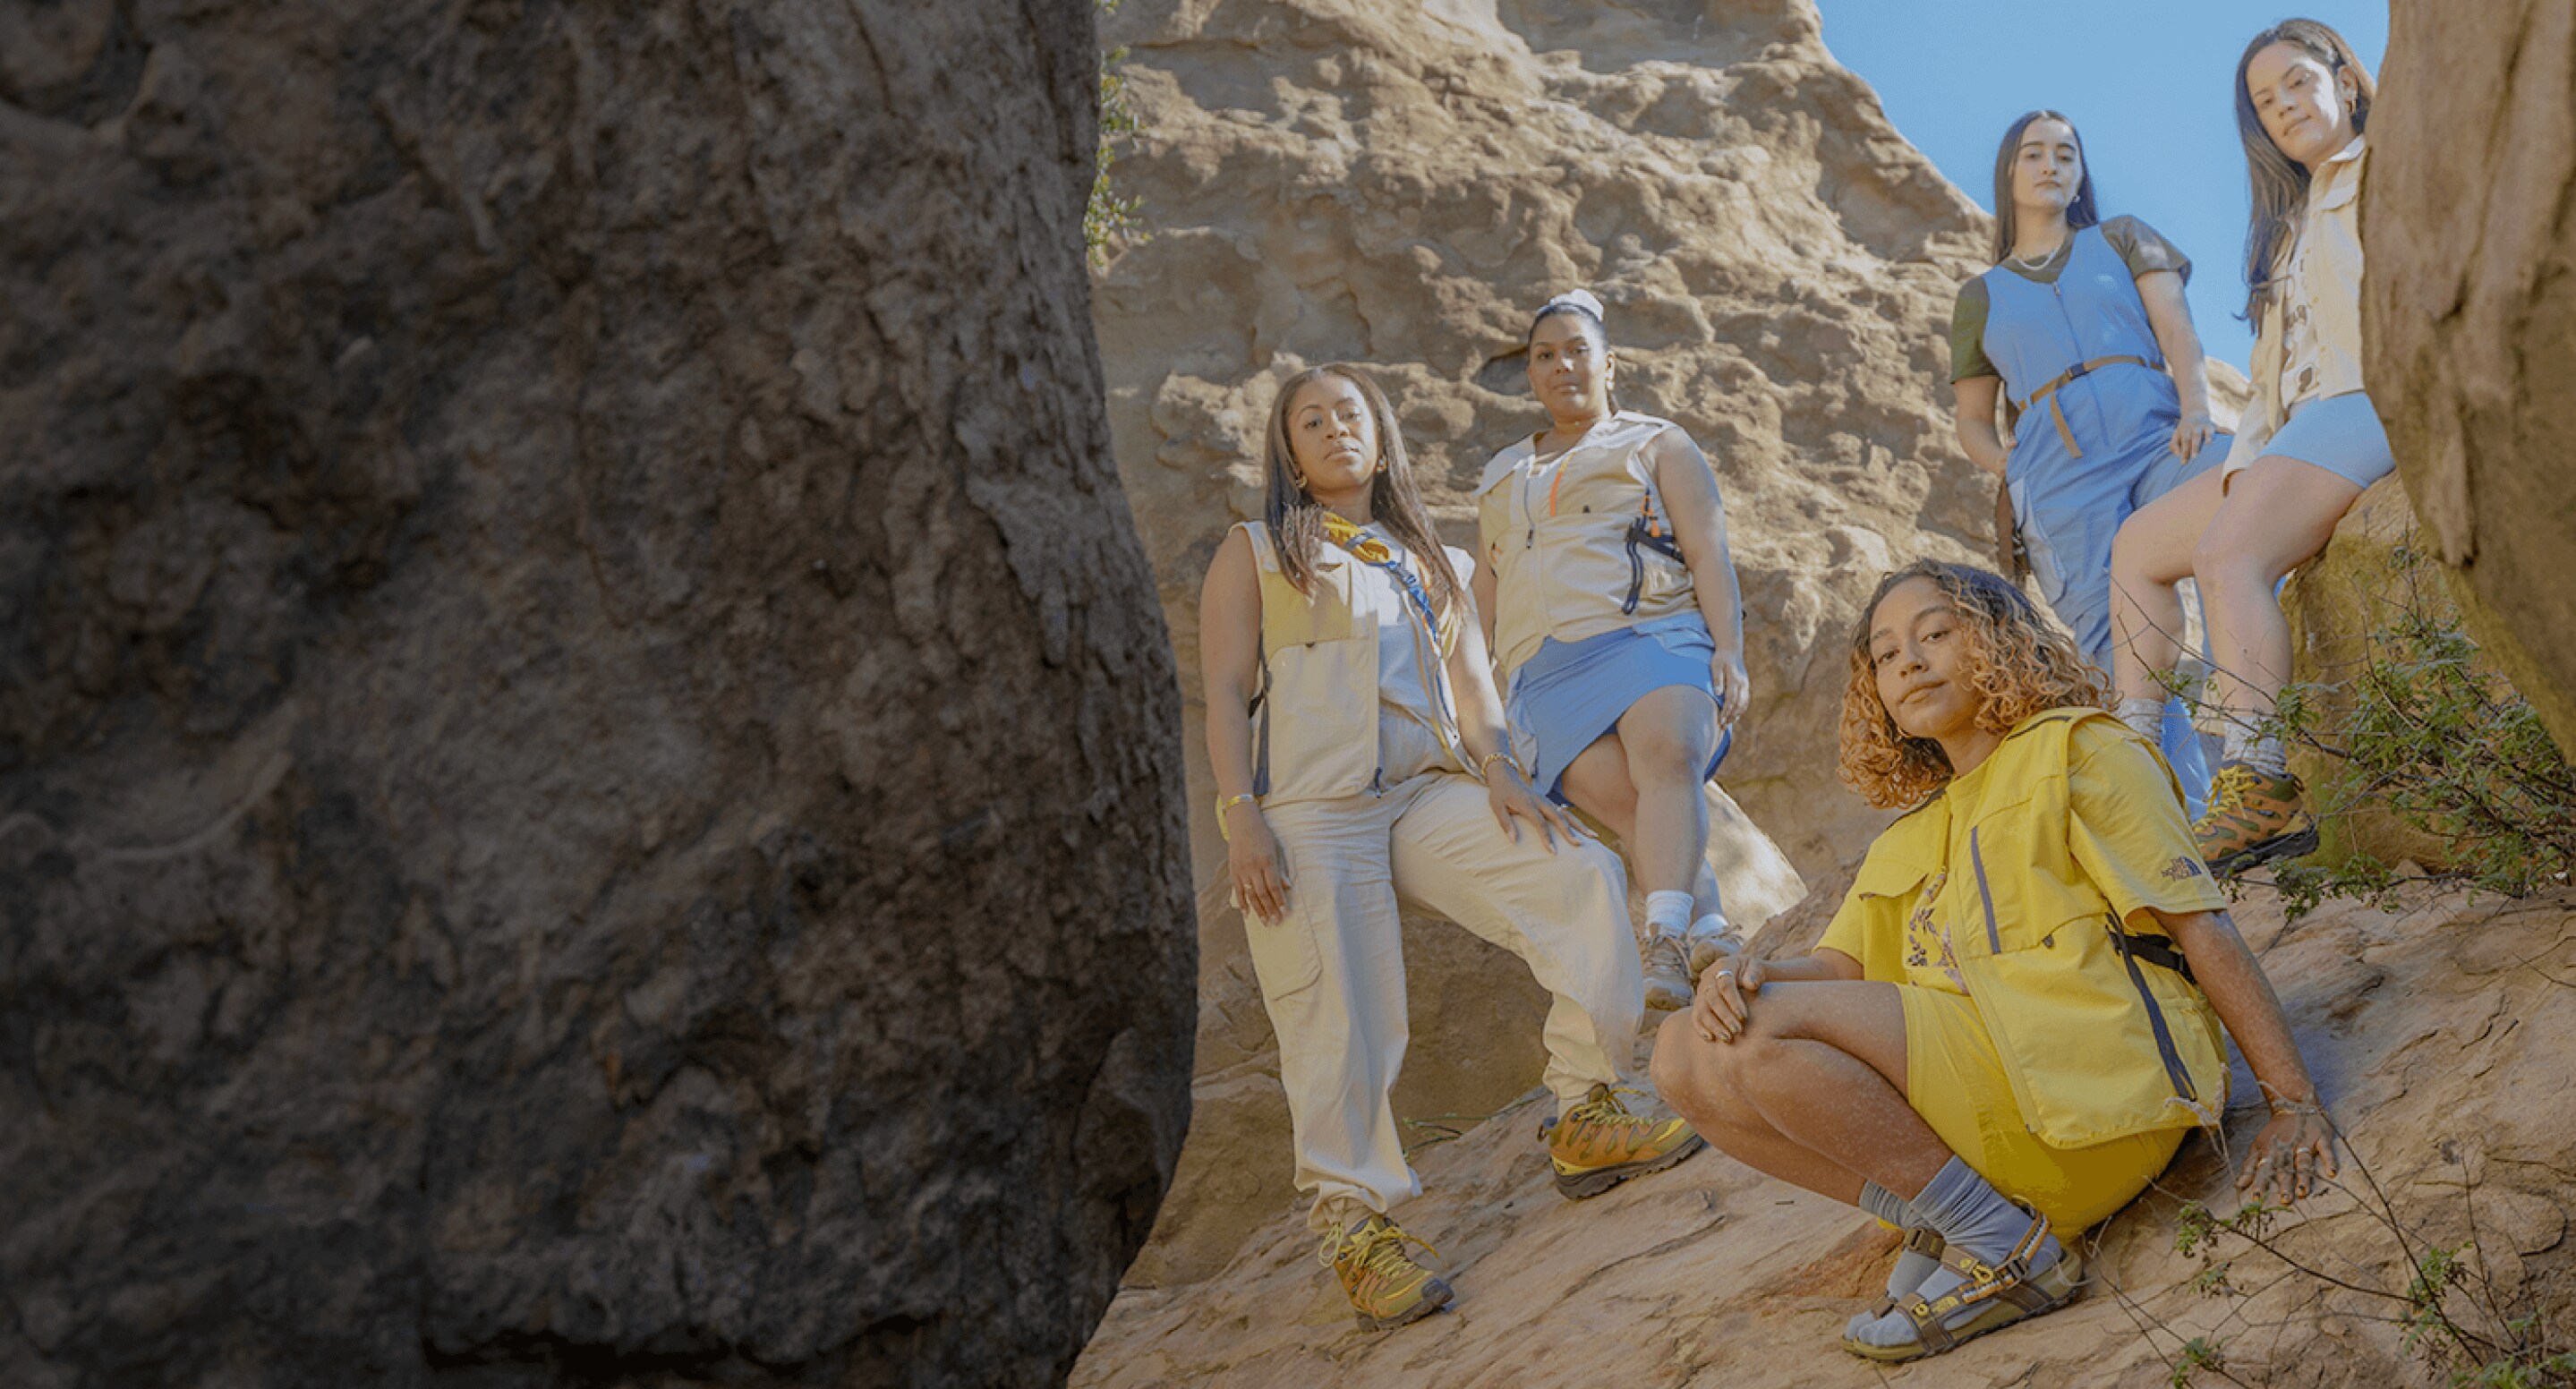 Explore Fund council member Evelynn Escobar and four women pose on granite boulders wearing gear from The North Face Hike Clerb Capsule Collection. 